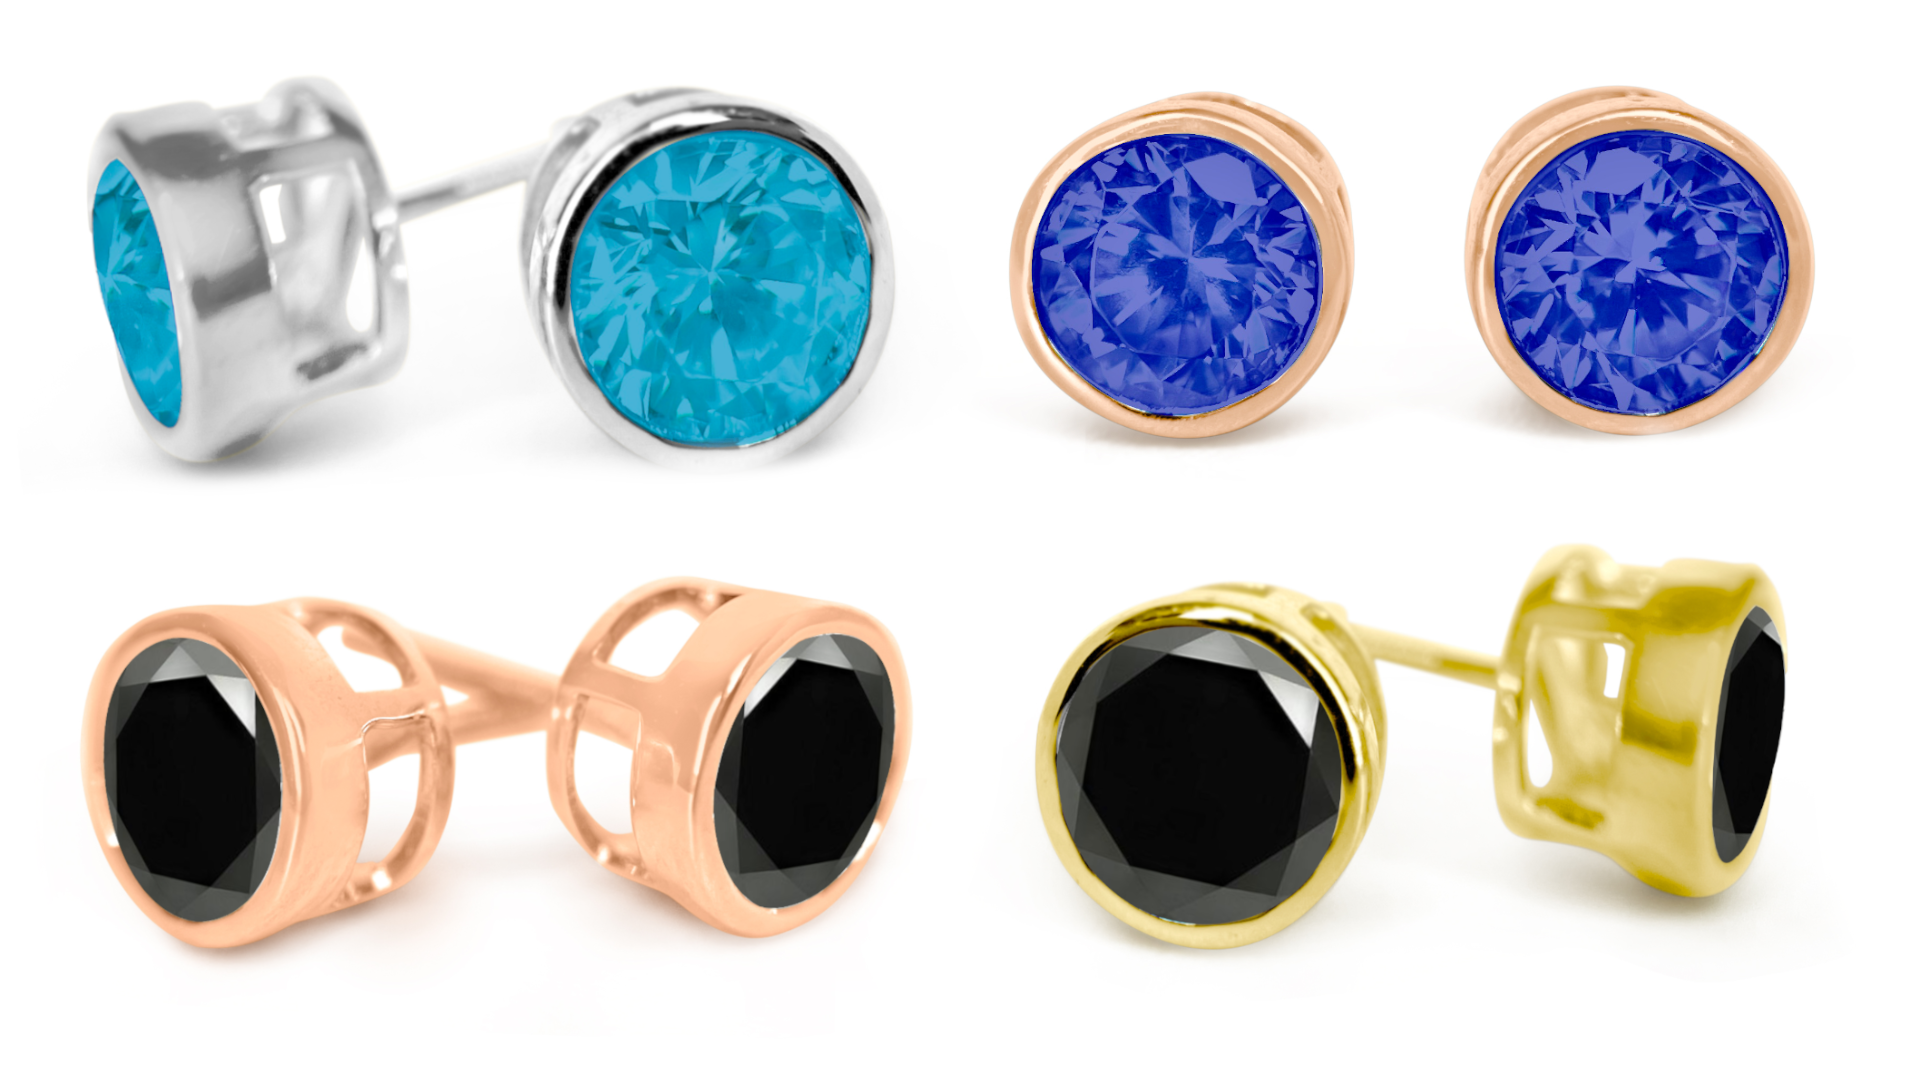 The new Bezel collection is a fashion in minimalist jewelry